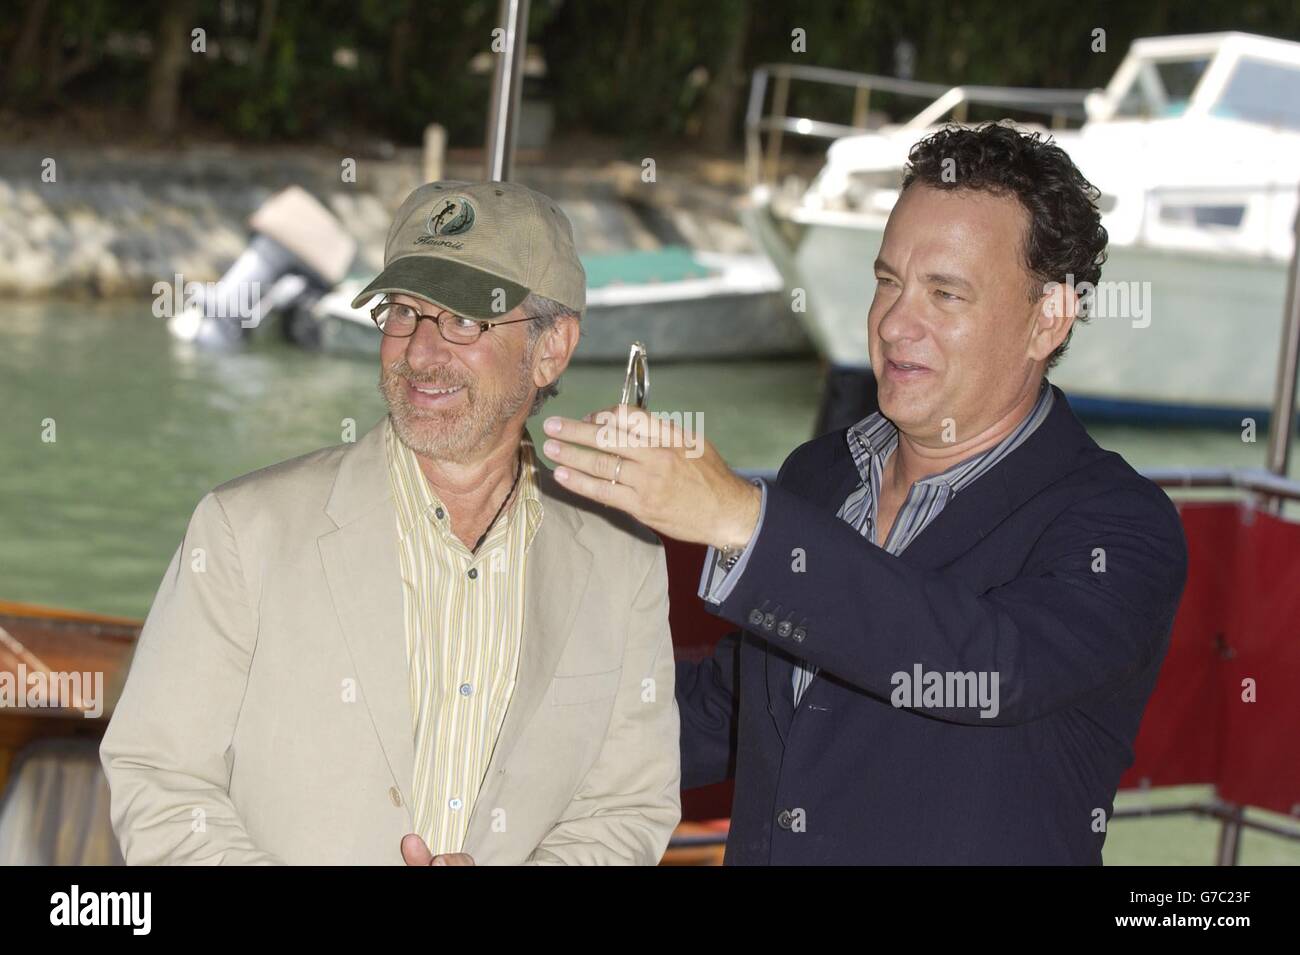 US actor Tom Hanks (right) and director Steven Spielberg arrive at the Lido in Venice to promote their new film Terminal during the 61st International Venice Film Festival. Stock Photo